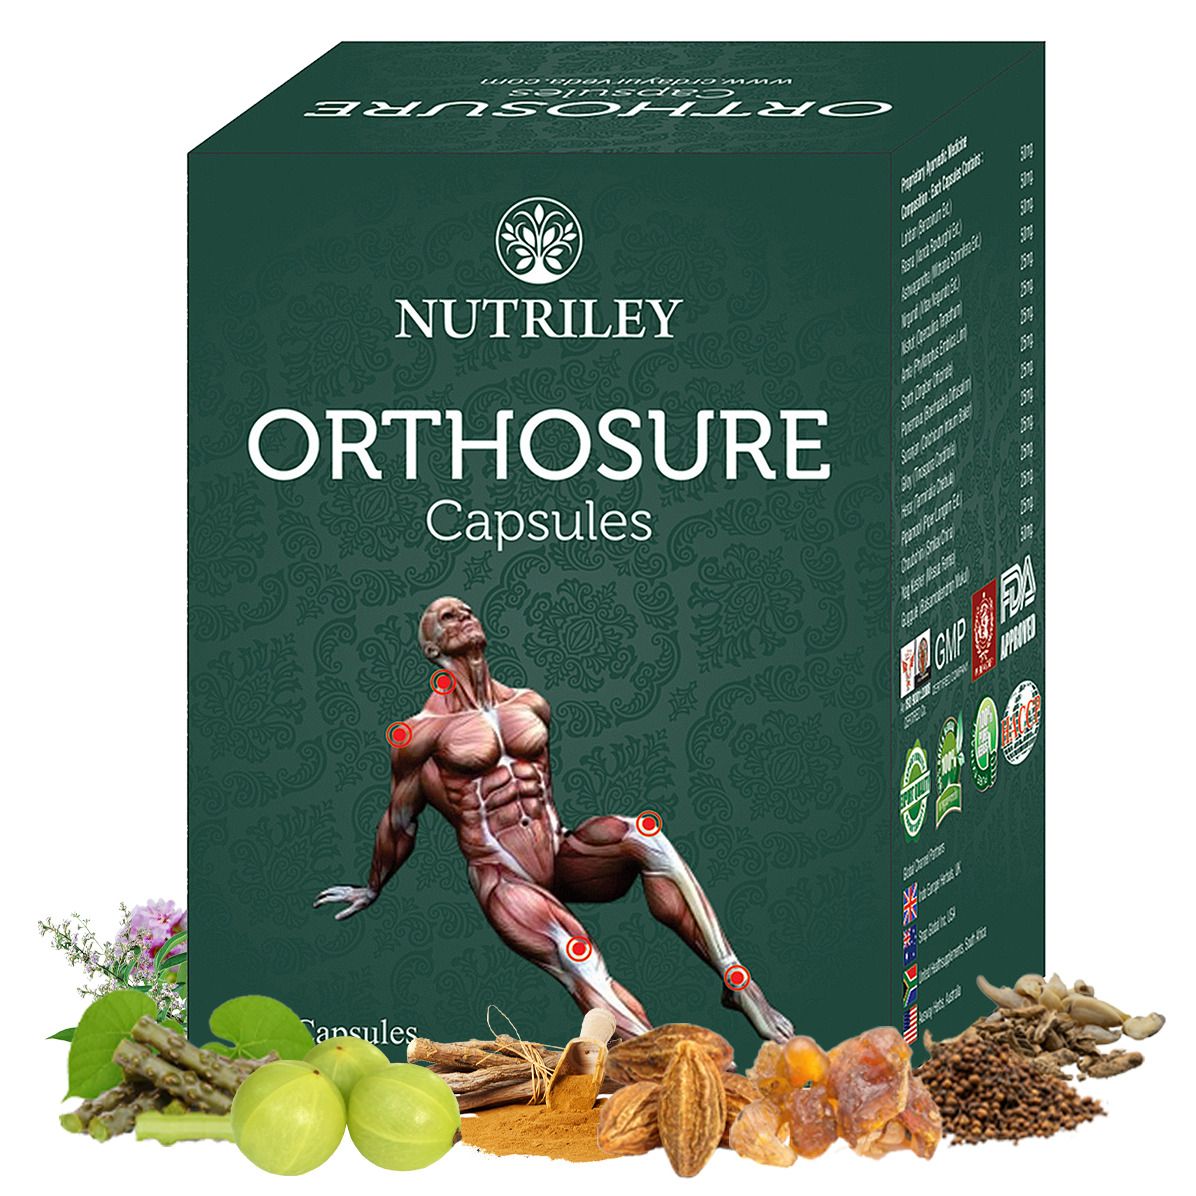 Nutriley Orthosure - Joint Pain / Arthritis Capsules (60 Capsules)